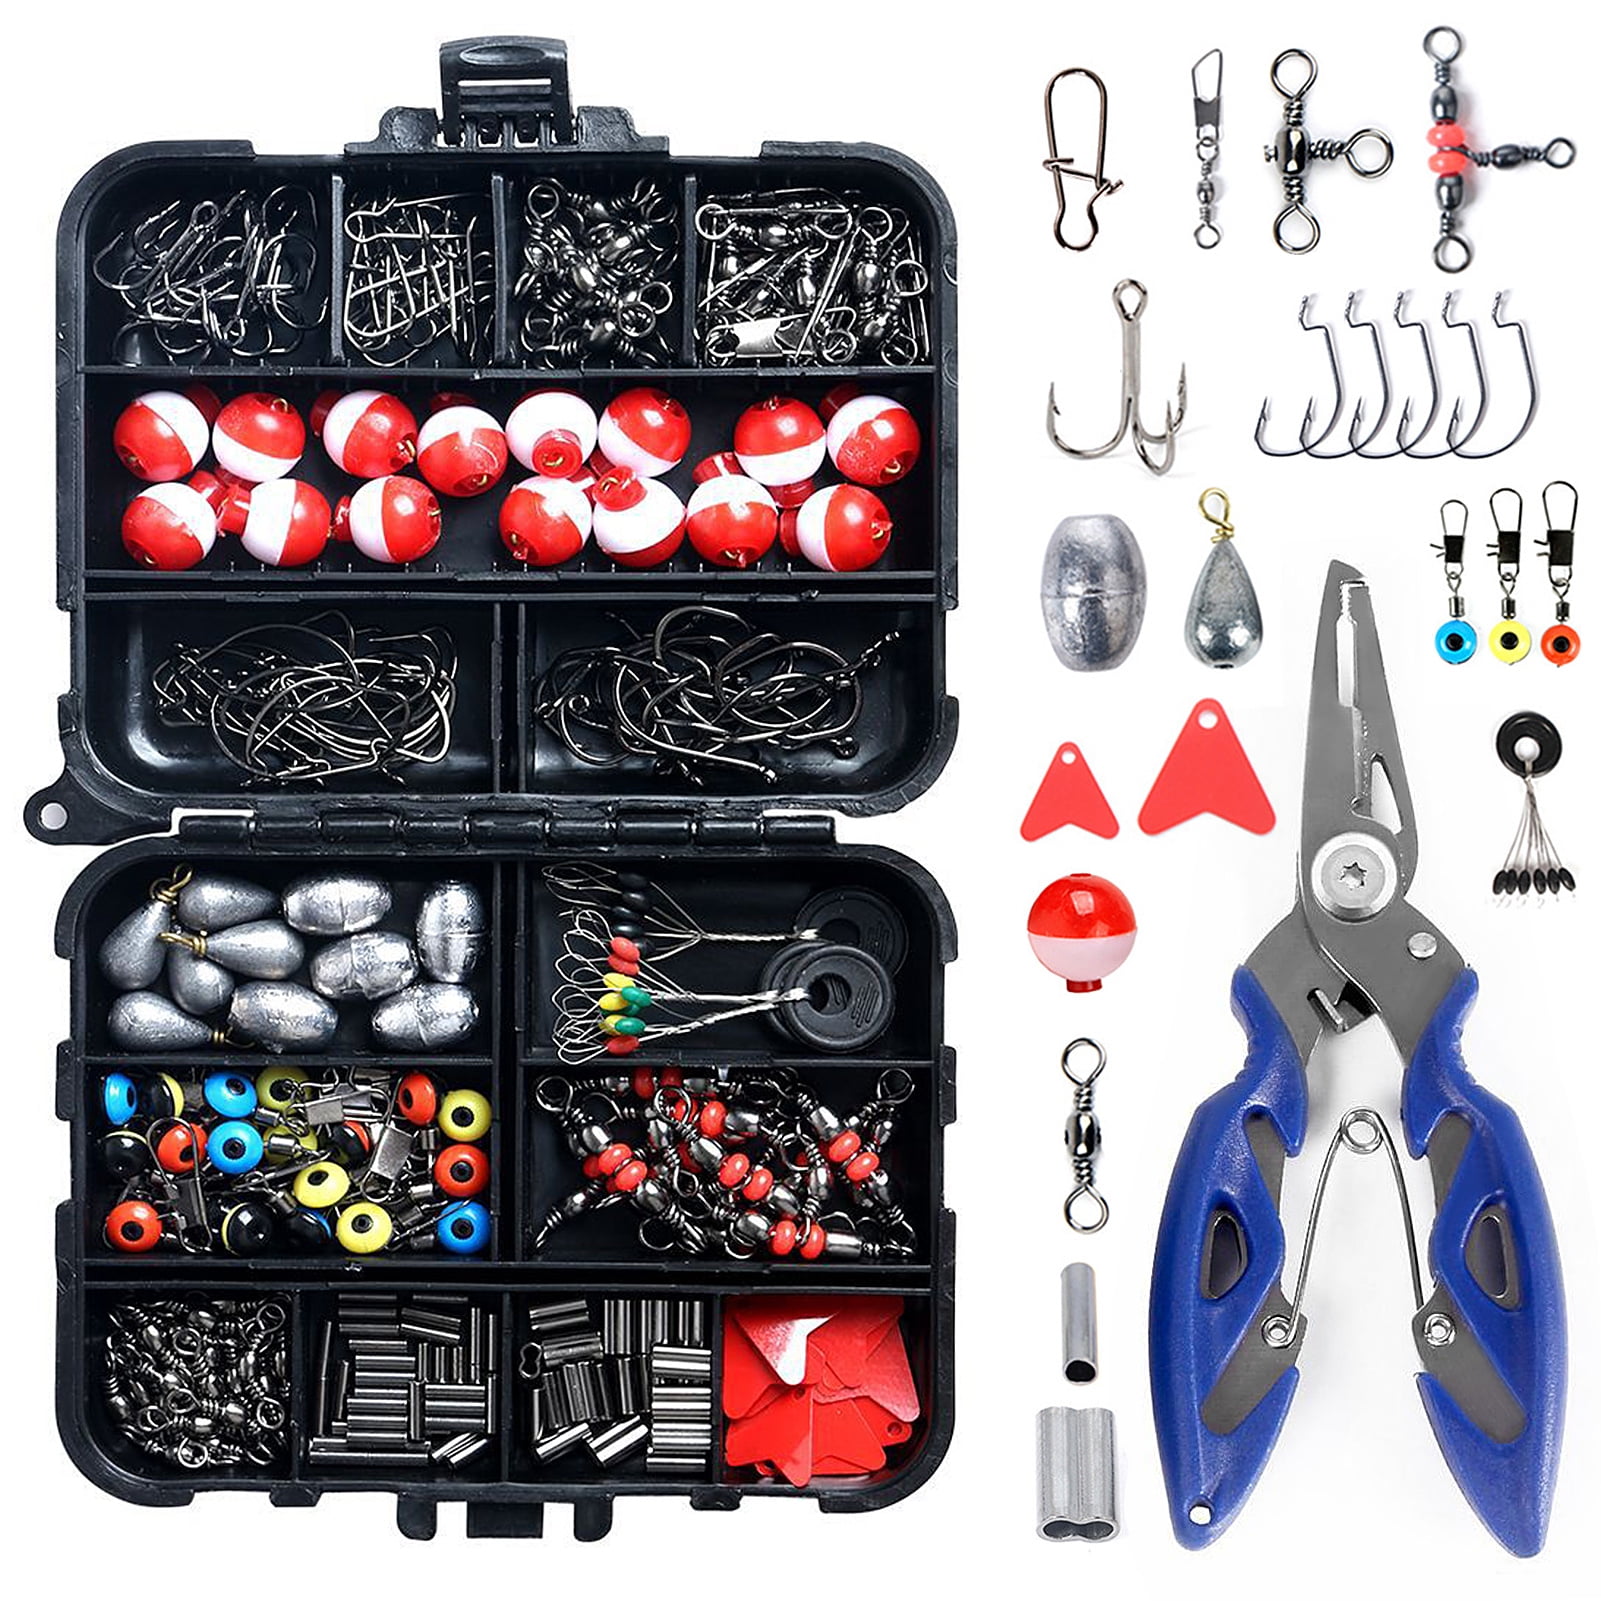 263PCS Fishing Accessories Kit, Fishing Terminal Tackle Set with Fishing  Weights Sinkers, Jig Hooks, Rolling Swivel Snap, Bobbers Float, Beads